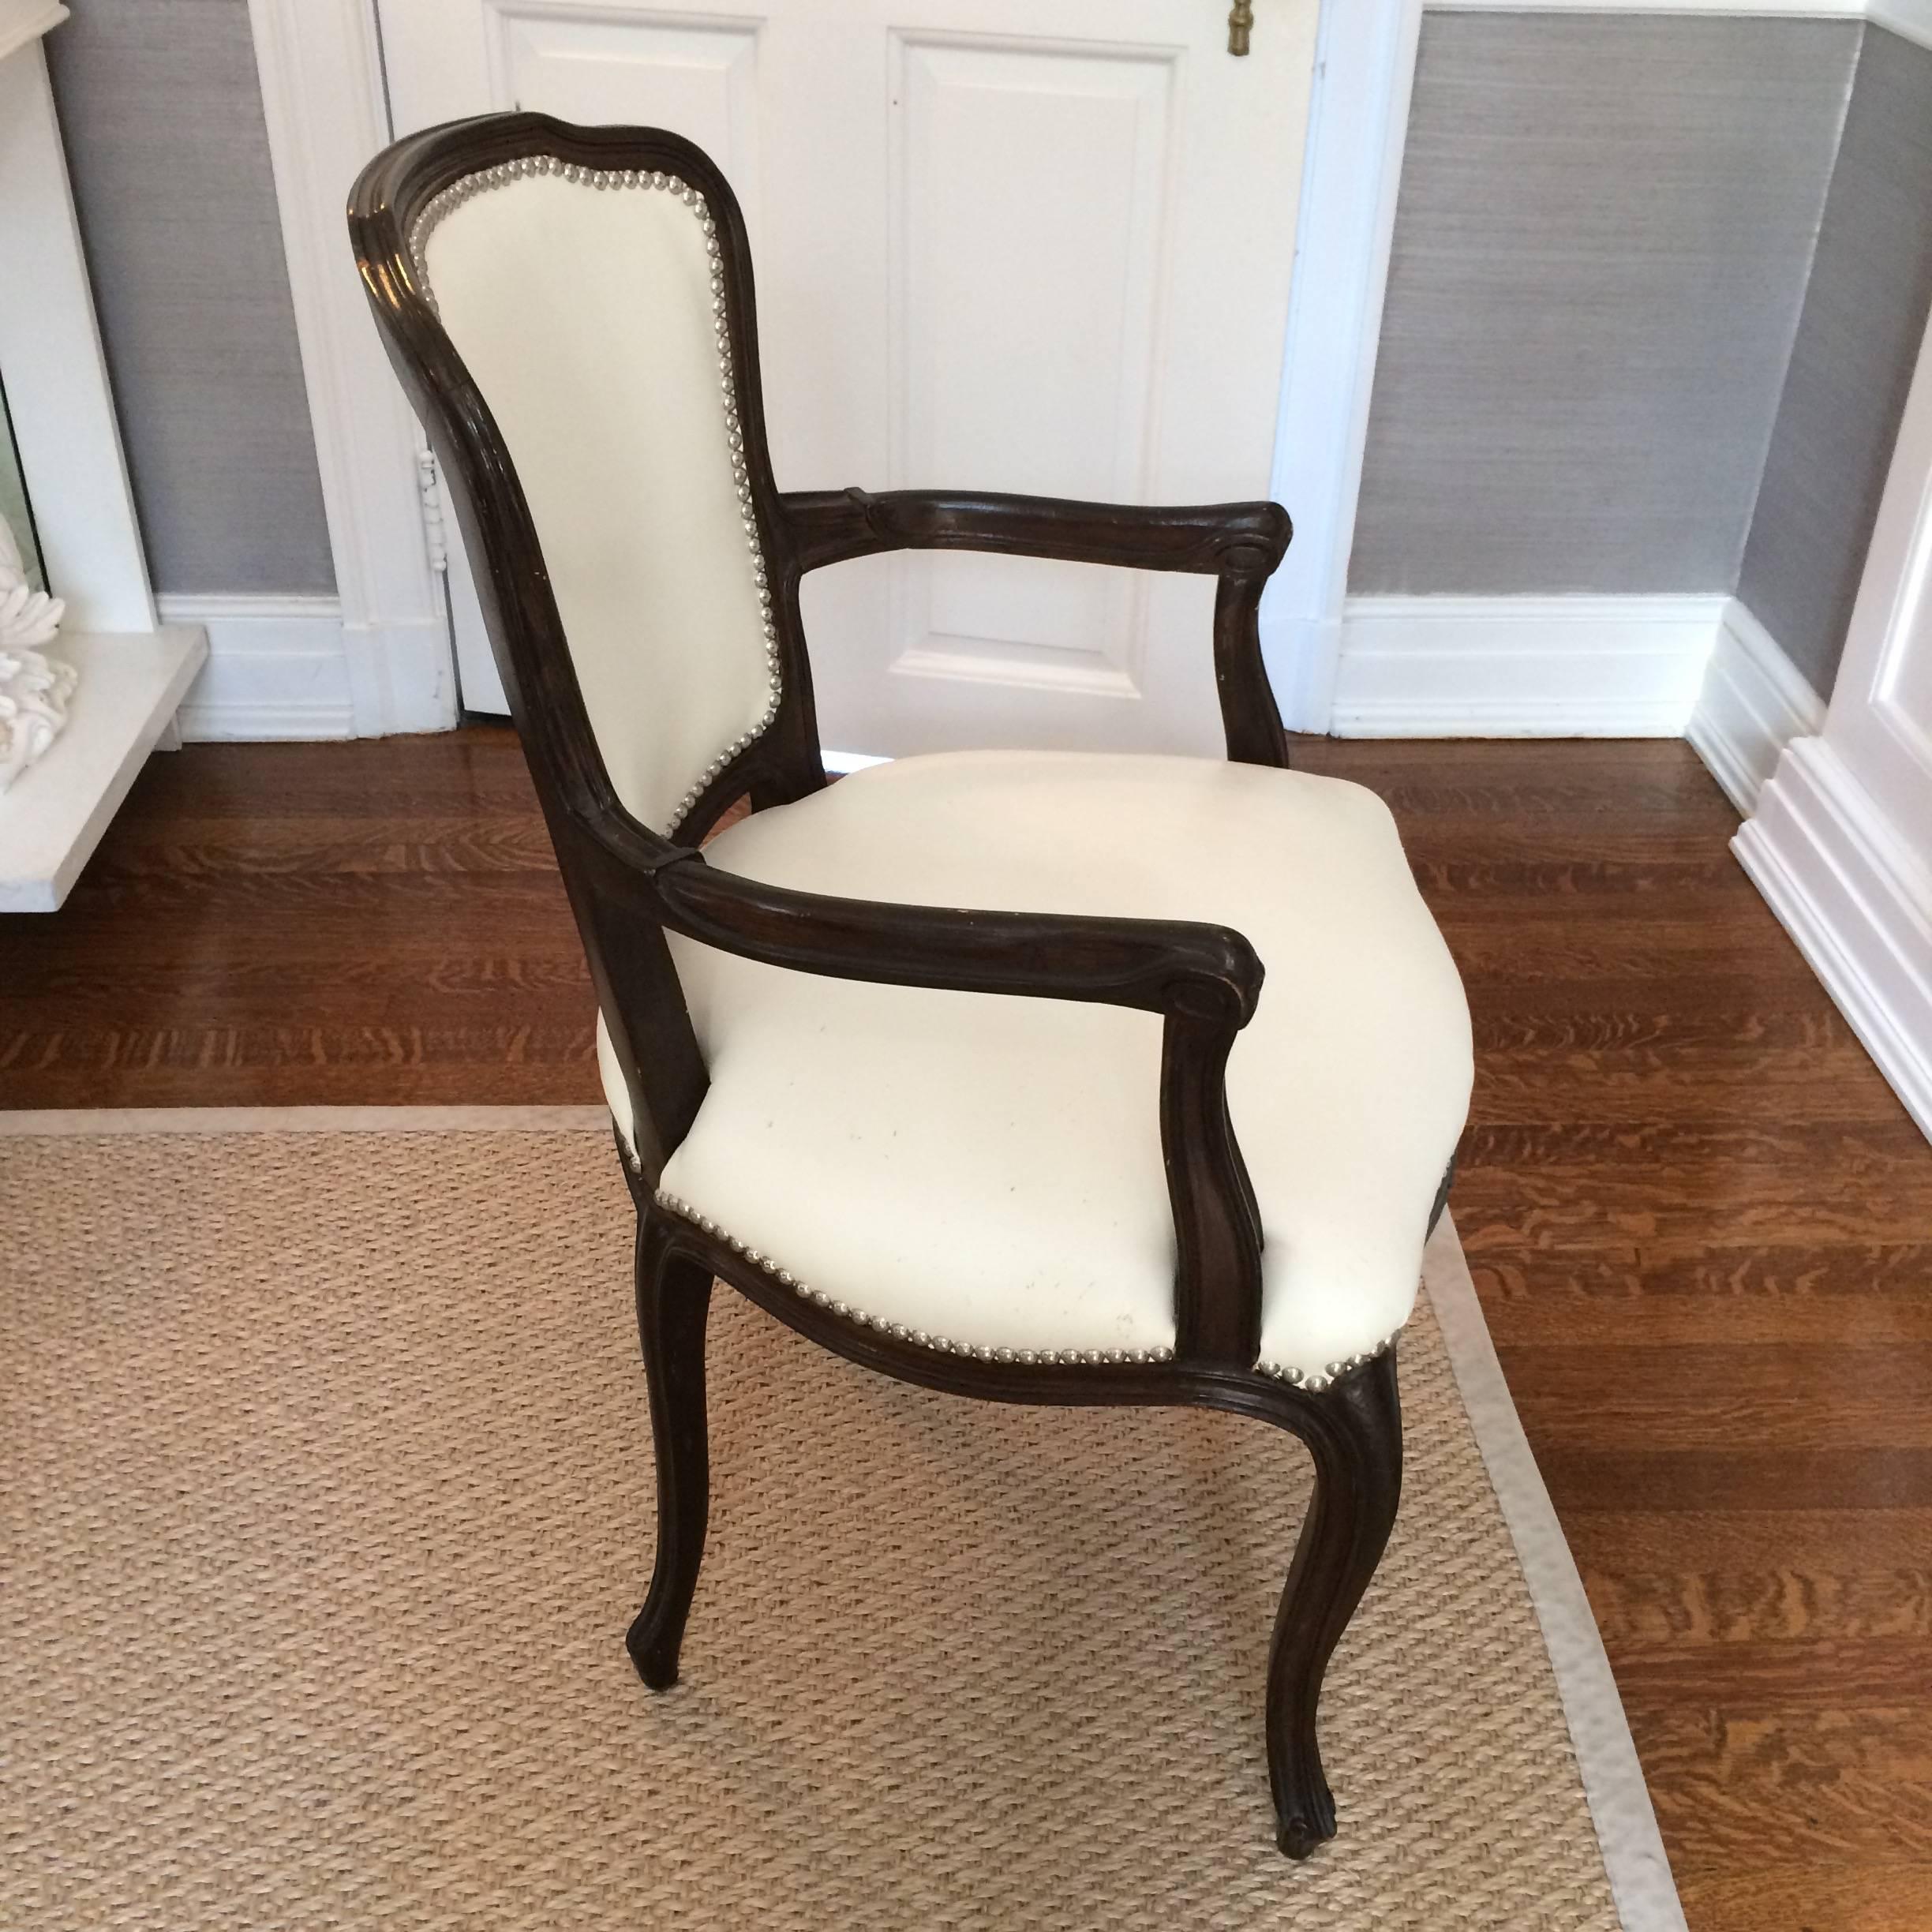 Stylish set of ten vintage French style dining chairs, four armchairs and six side chairs, having very dark brown wood and glamorized with white leather upholstery and silver nailheads.
Note: Two armchairs and four side chairs are in very good